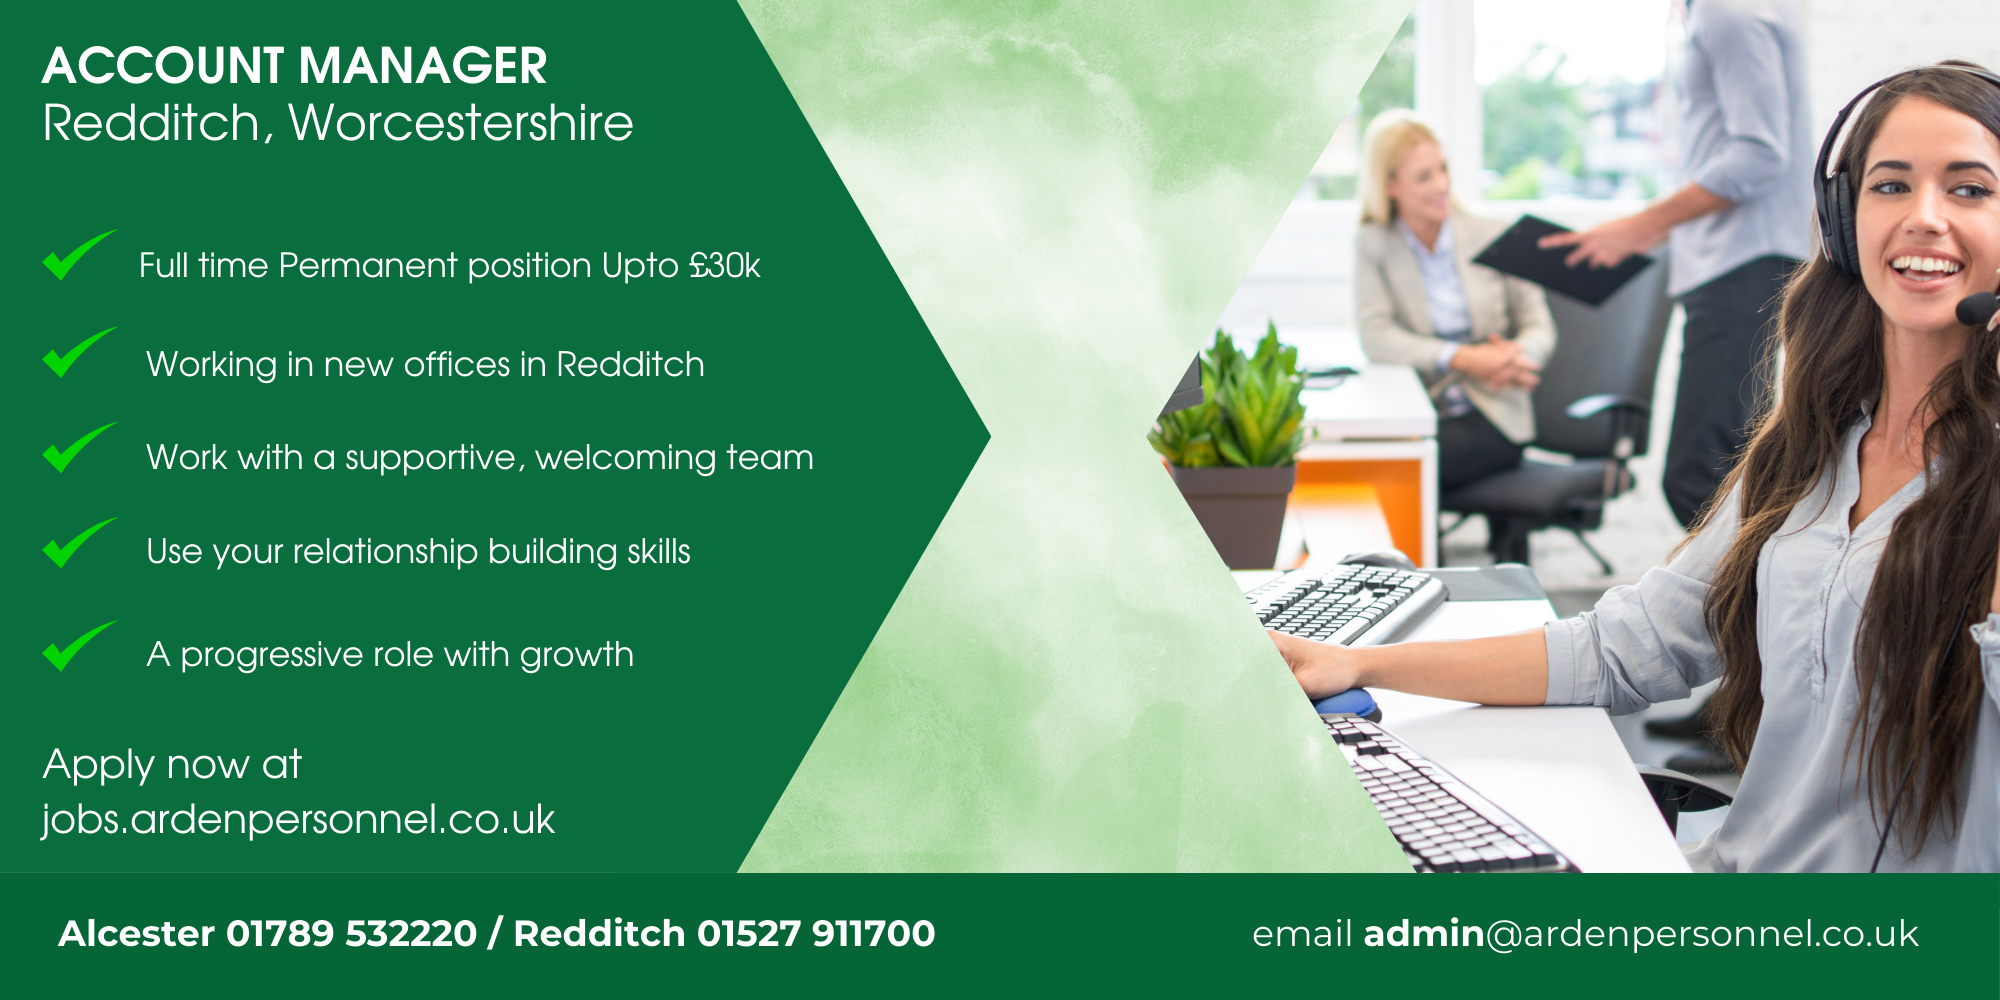 Account Manager based in Redditch